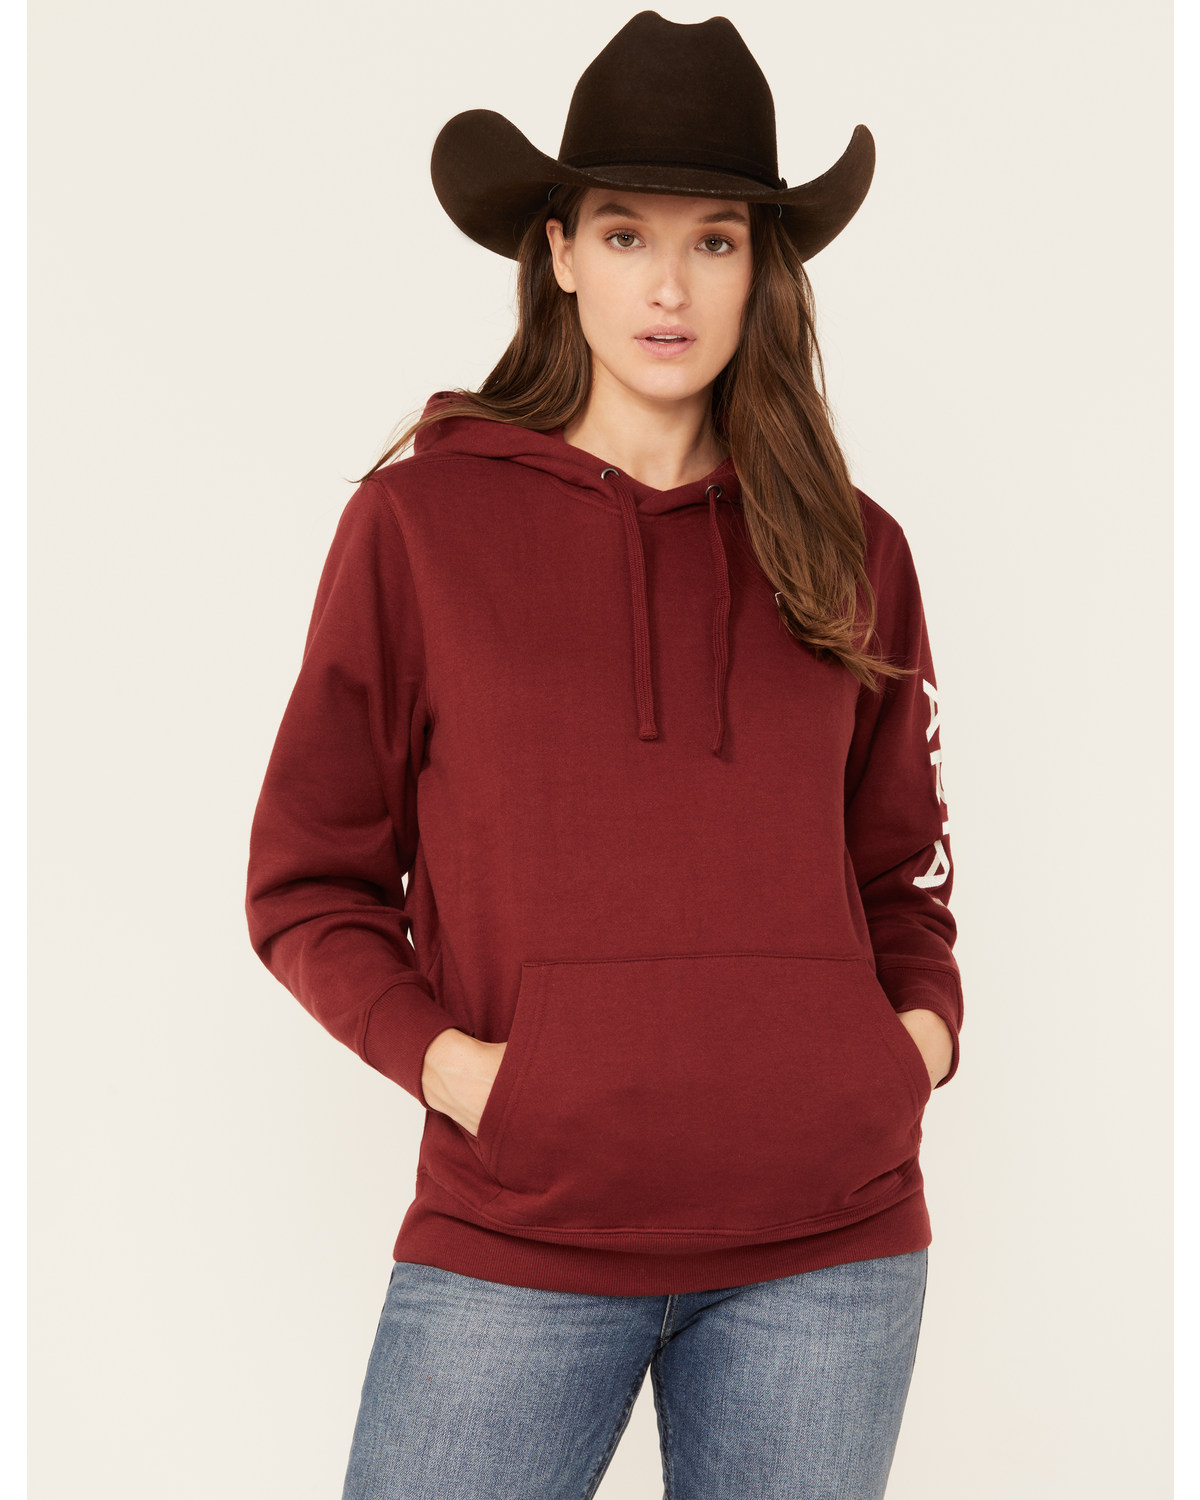 Ariat Women's R.E.A.L Embroidered Logo Hoodie